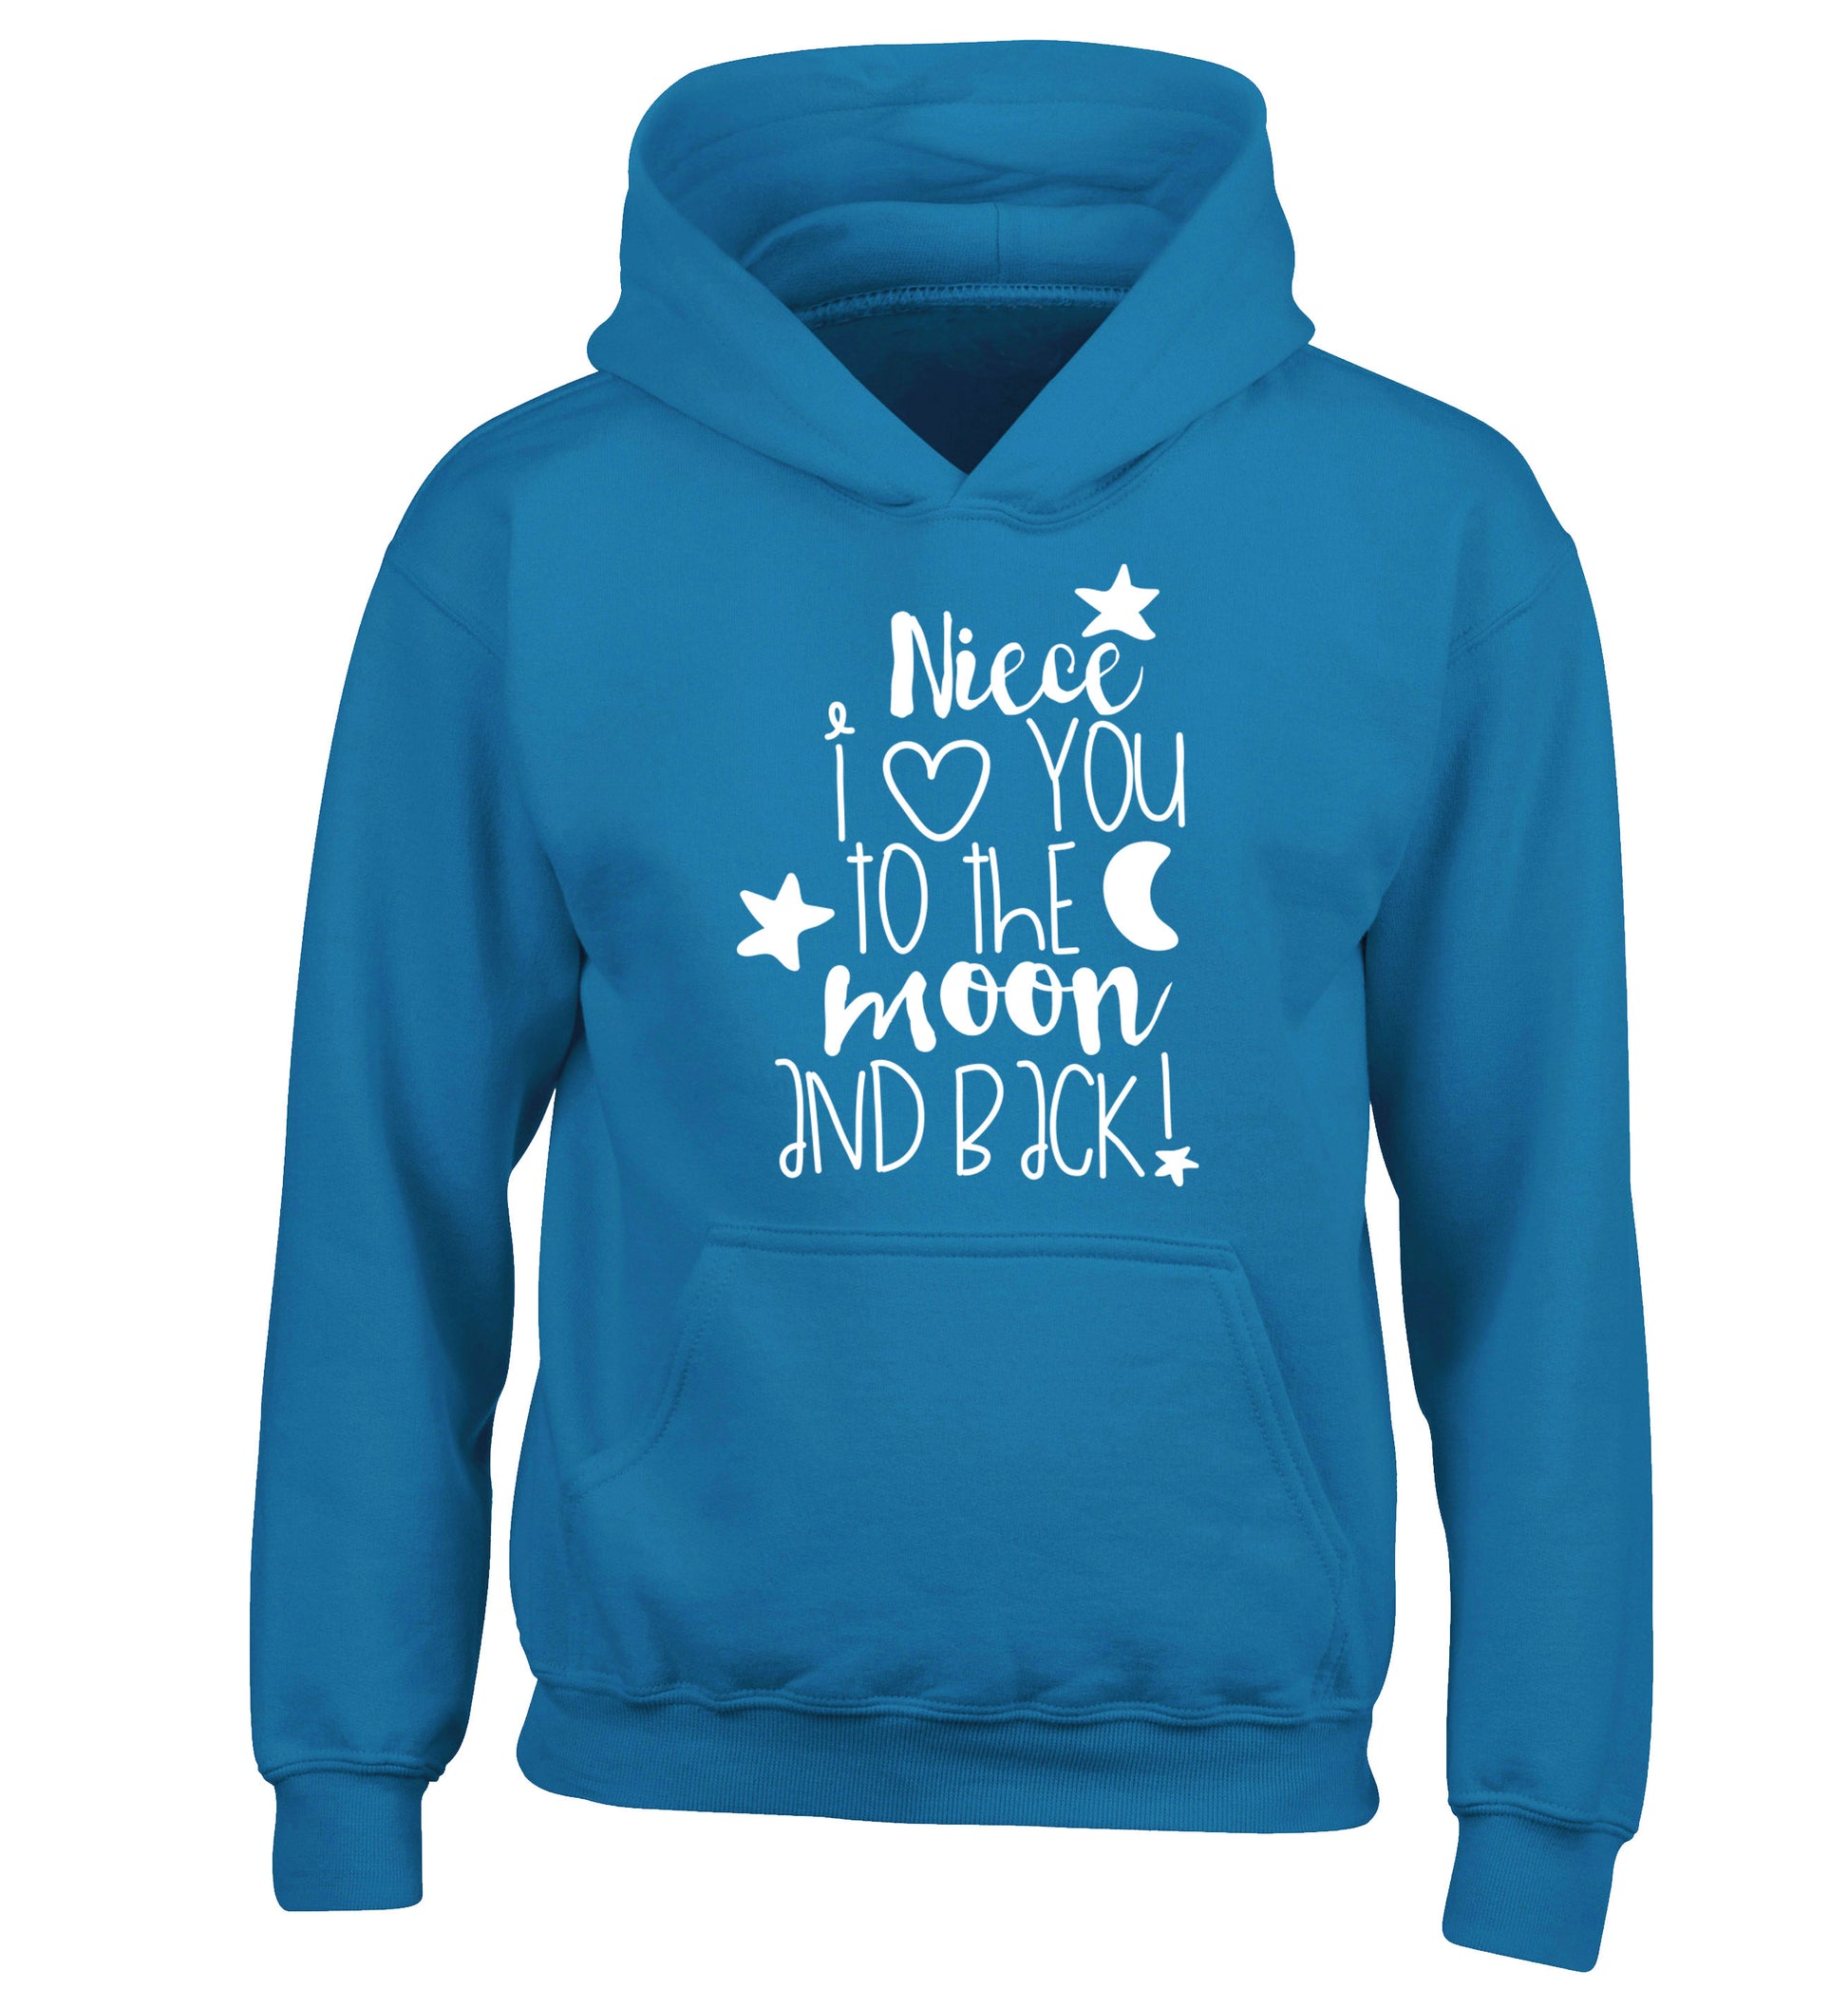 Niece I love you to the moon and back children's blue hoodie 12-14 Years